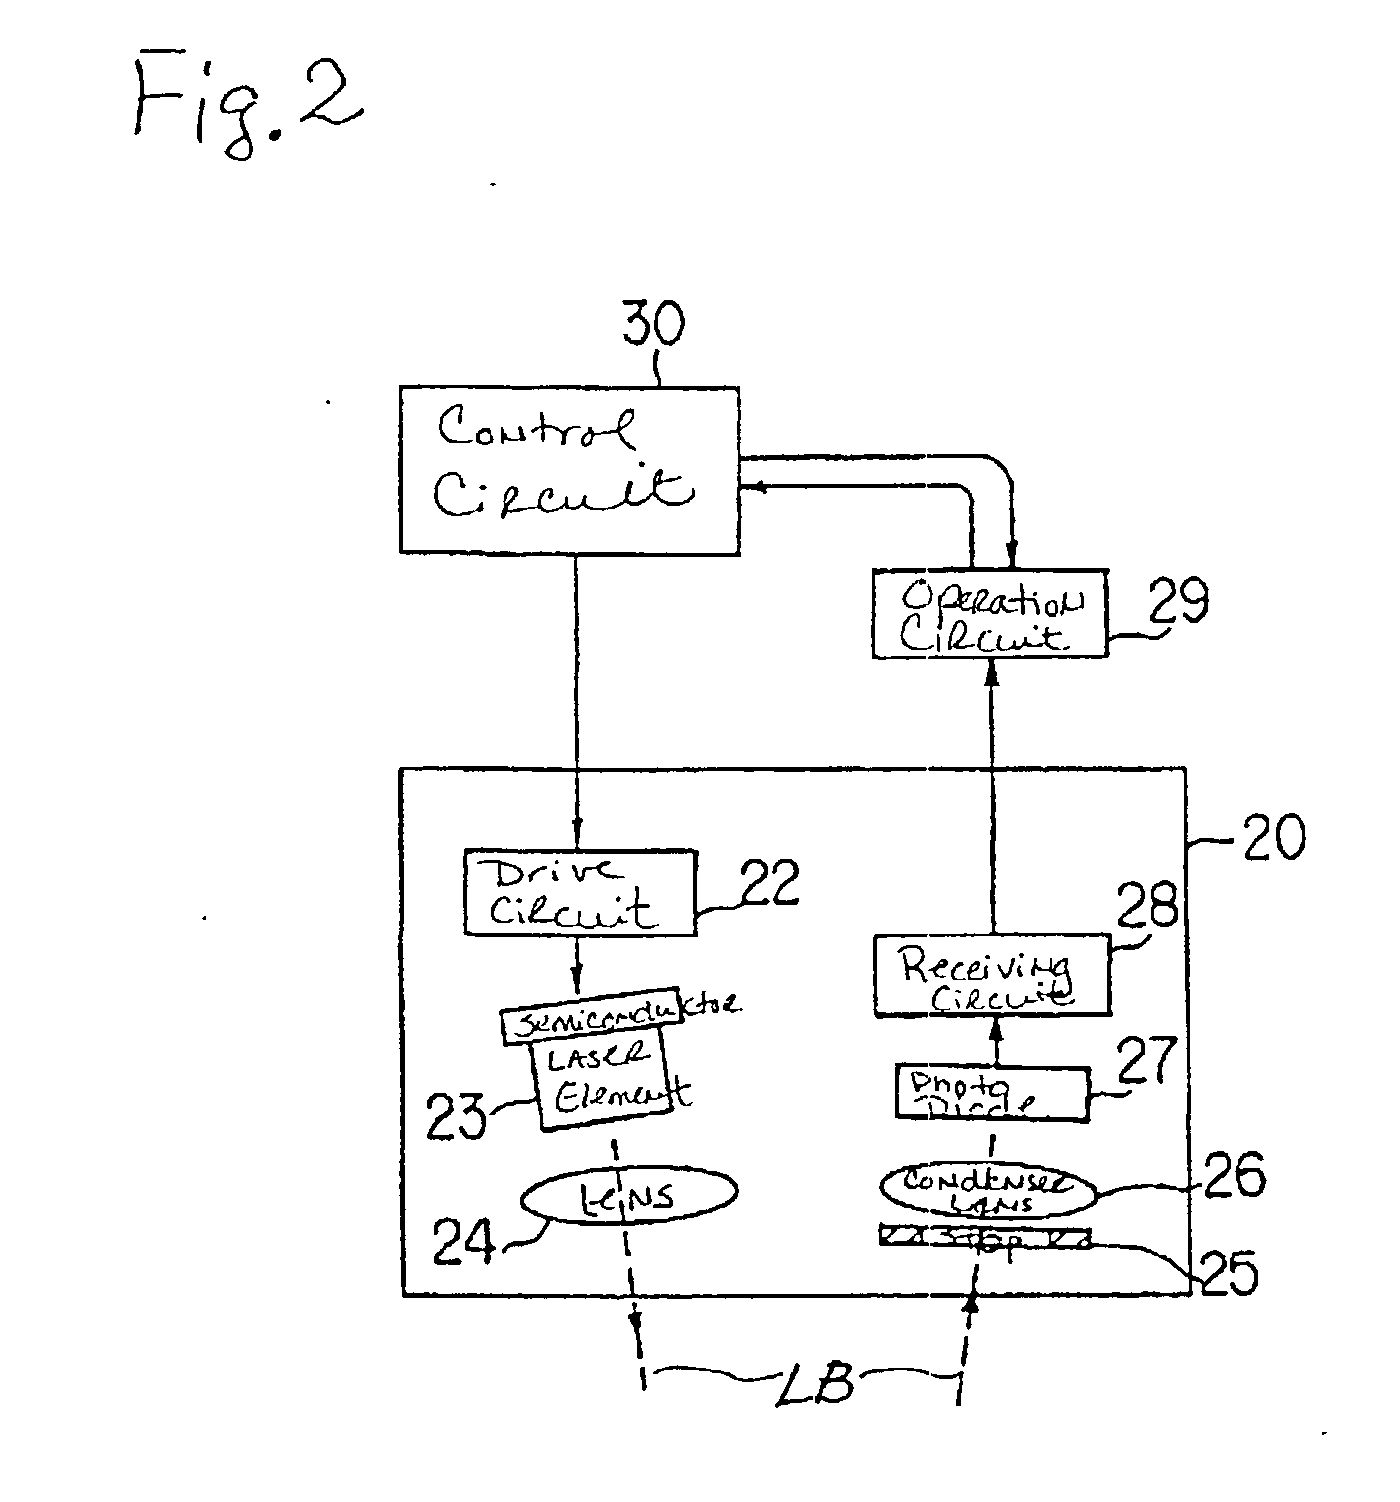 Method and apparatus for detecting a wafer's posture on a susceptor